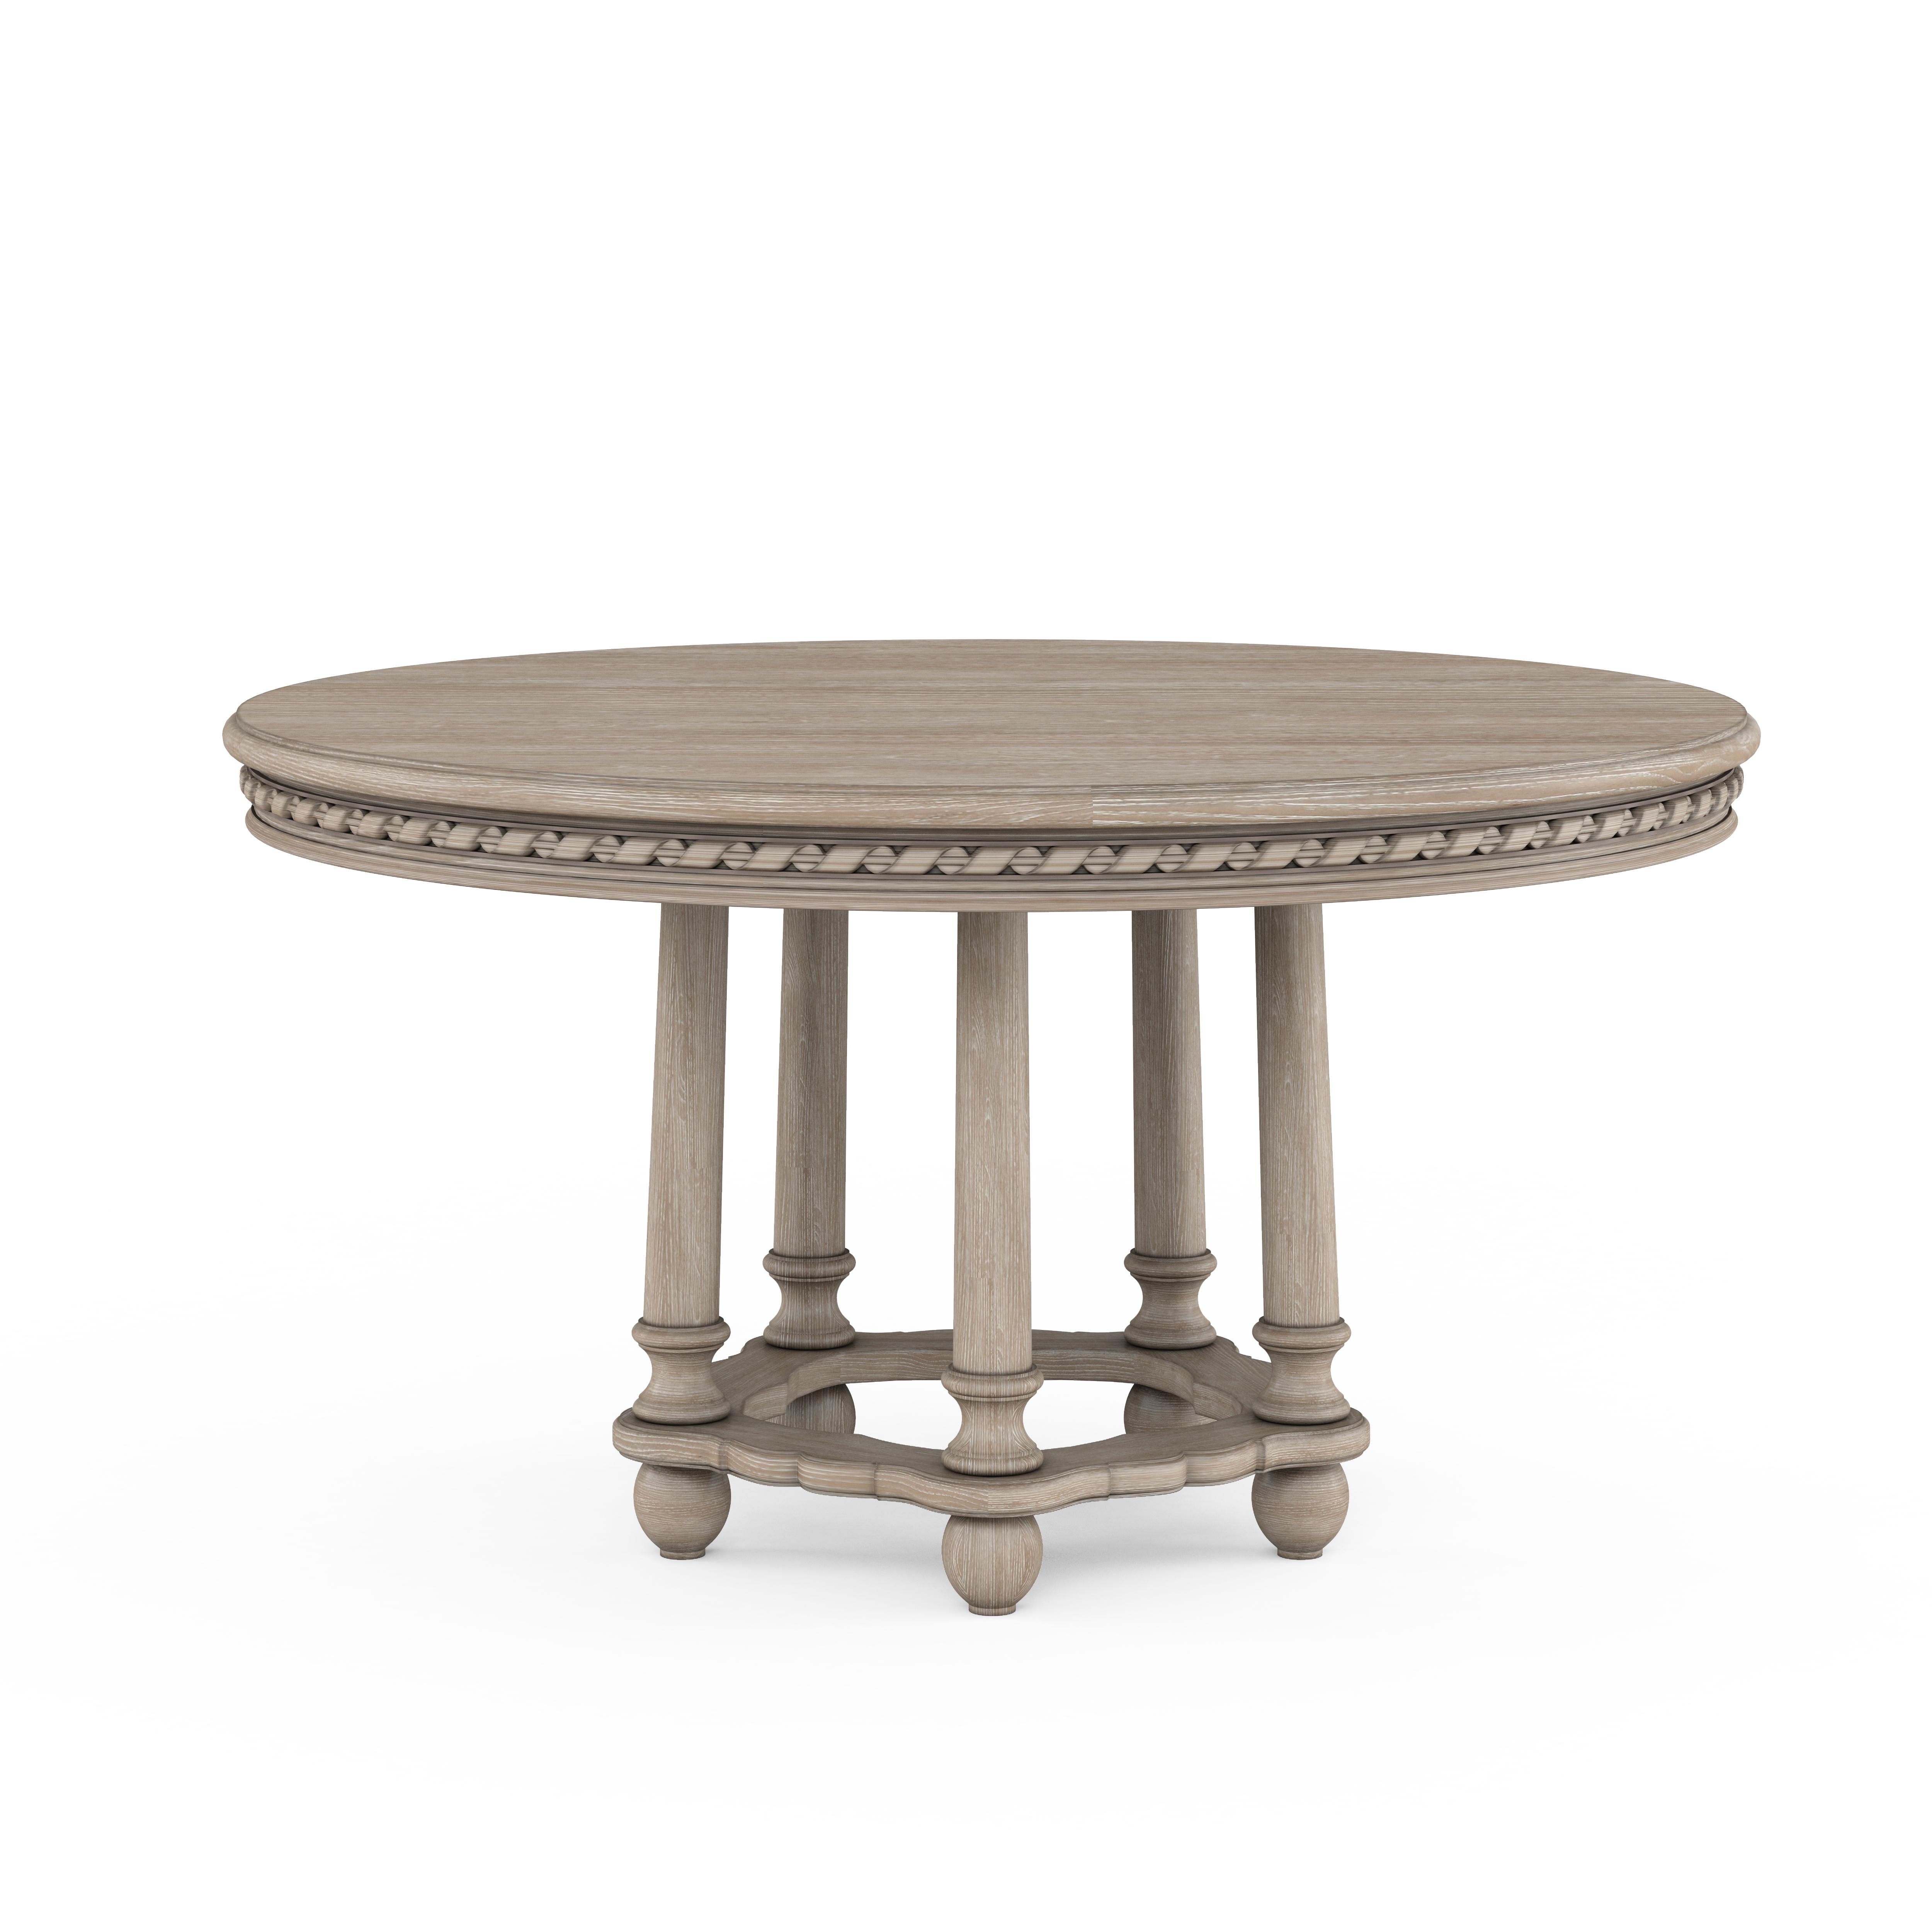 a.r.t. furniture Somerton Dining Table